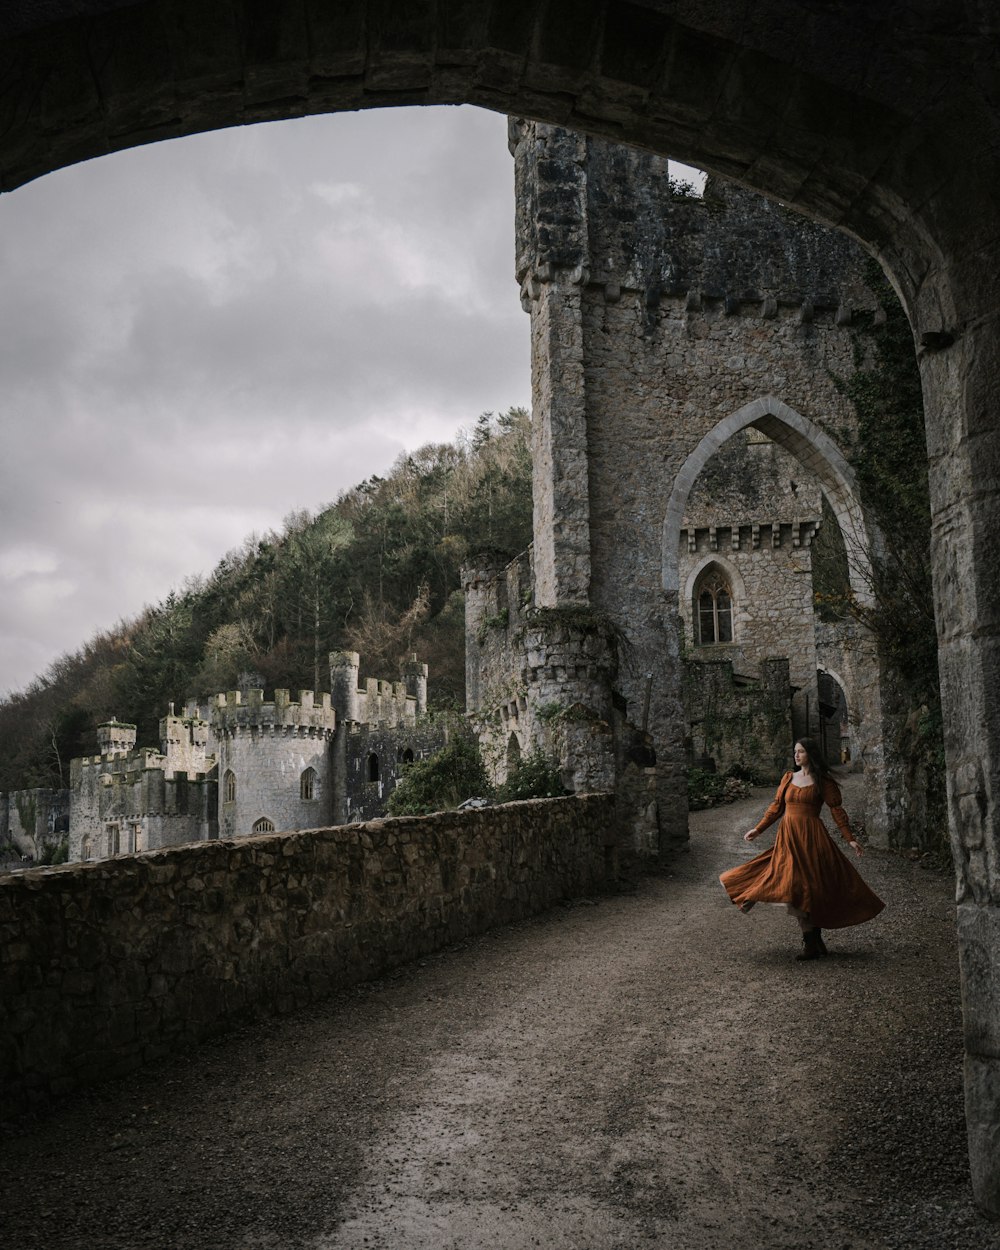 a woman in an orange dress is walking through an archway